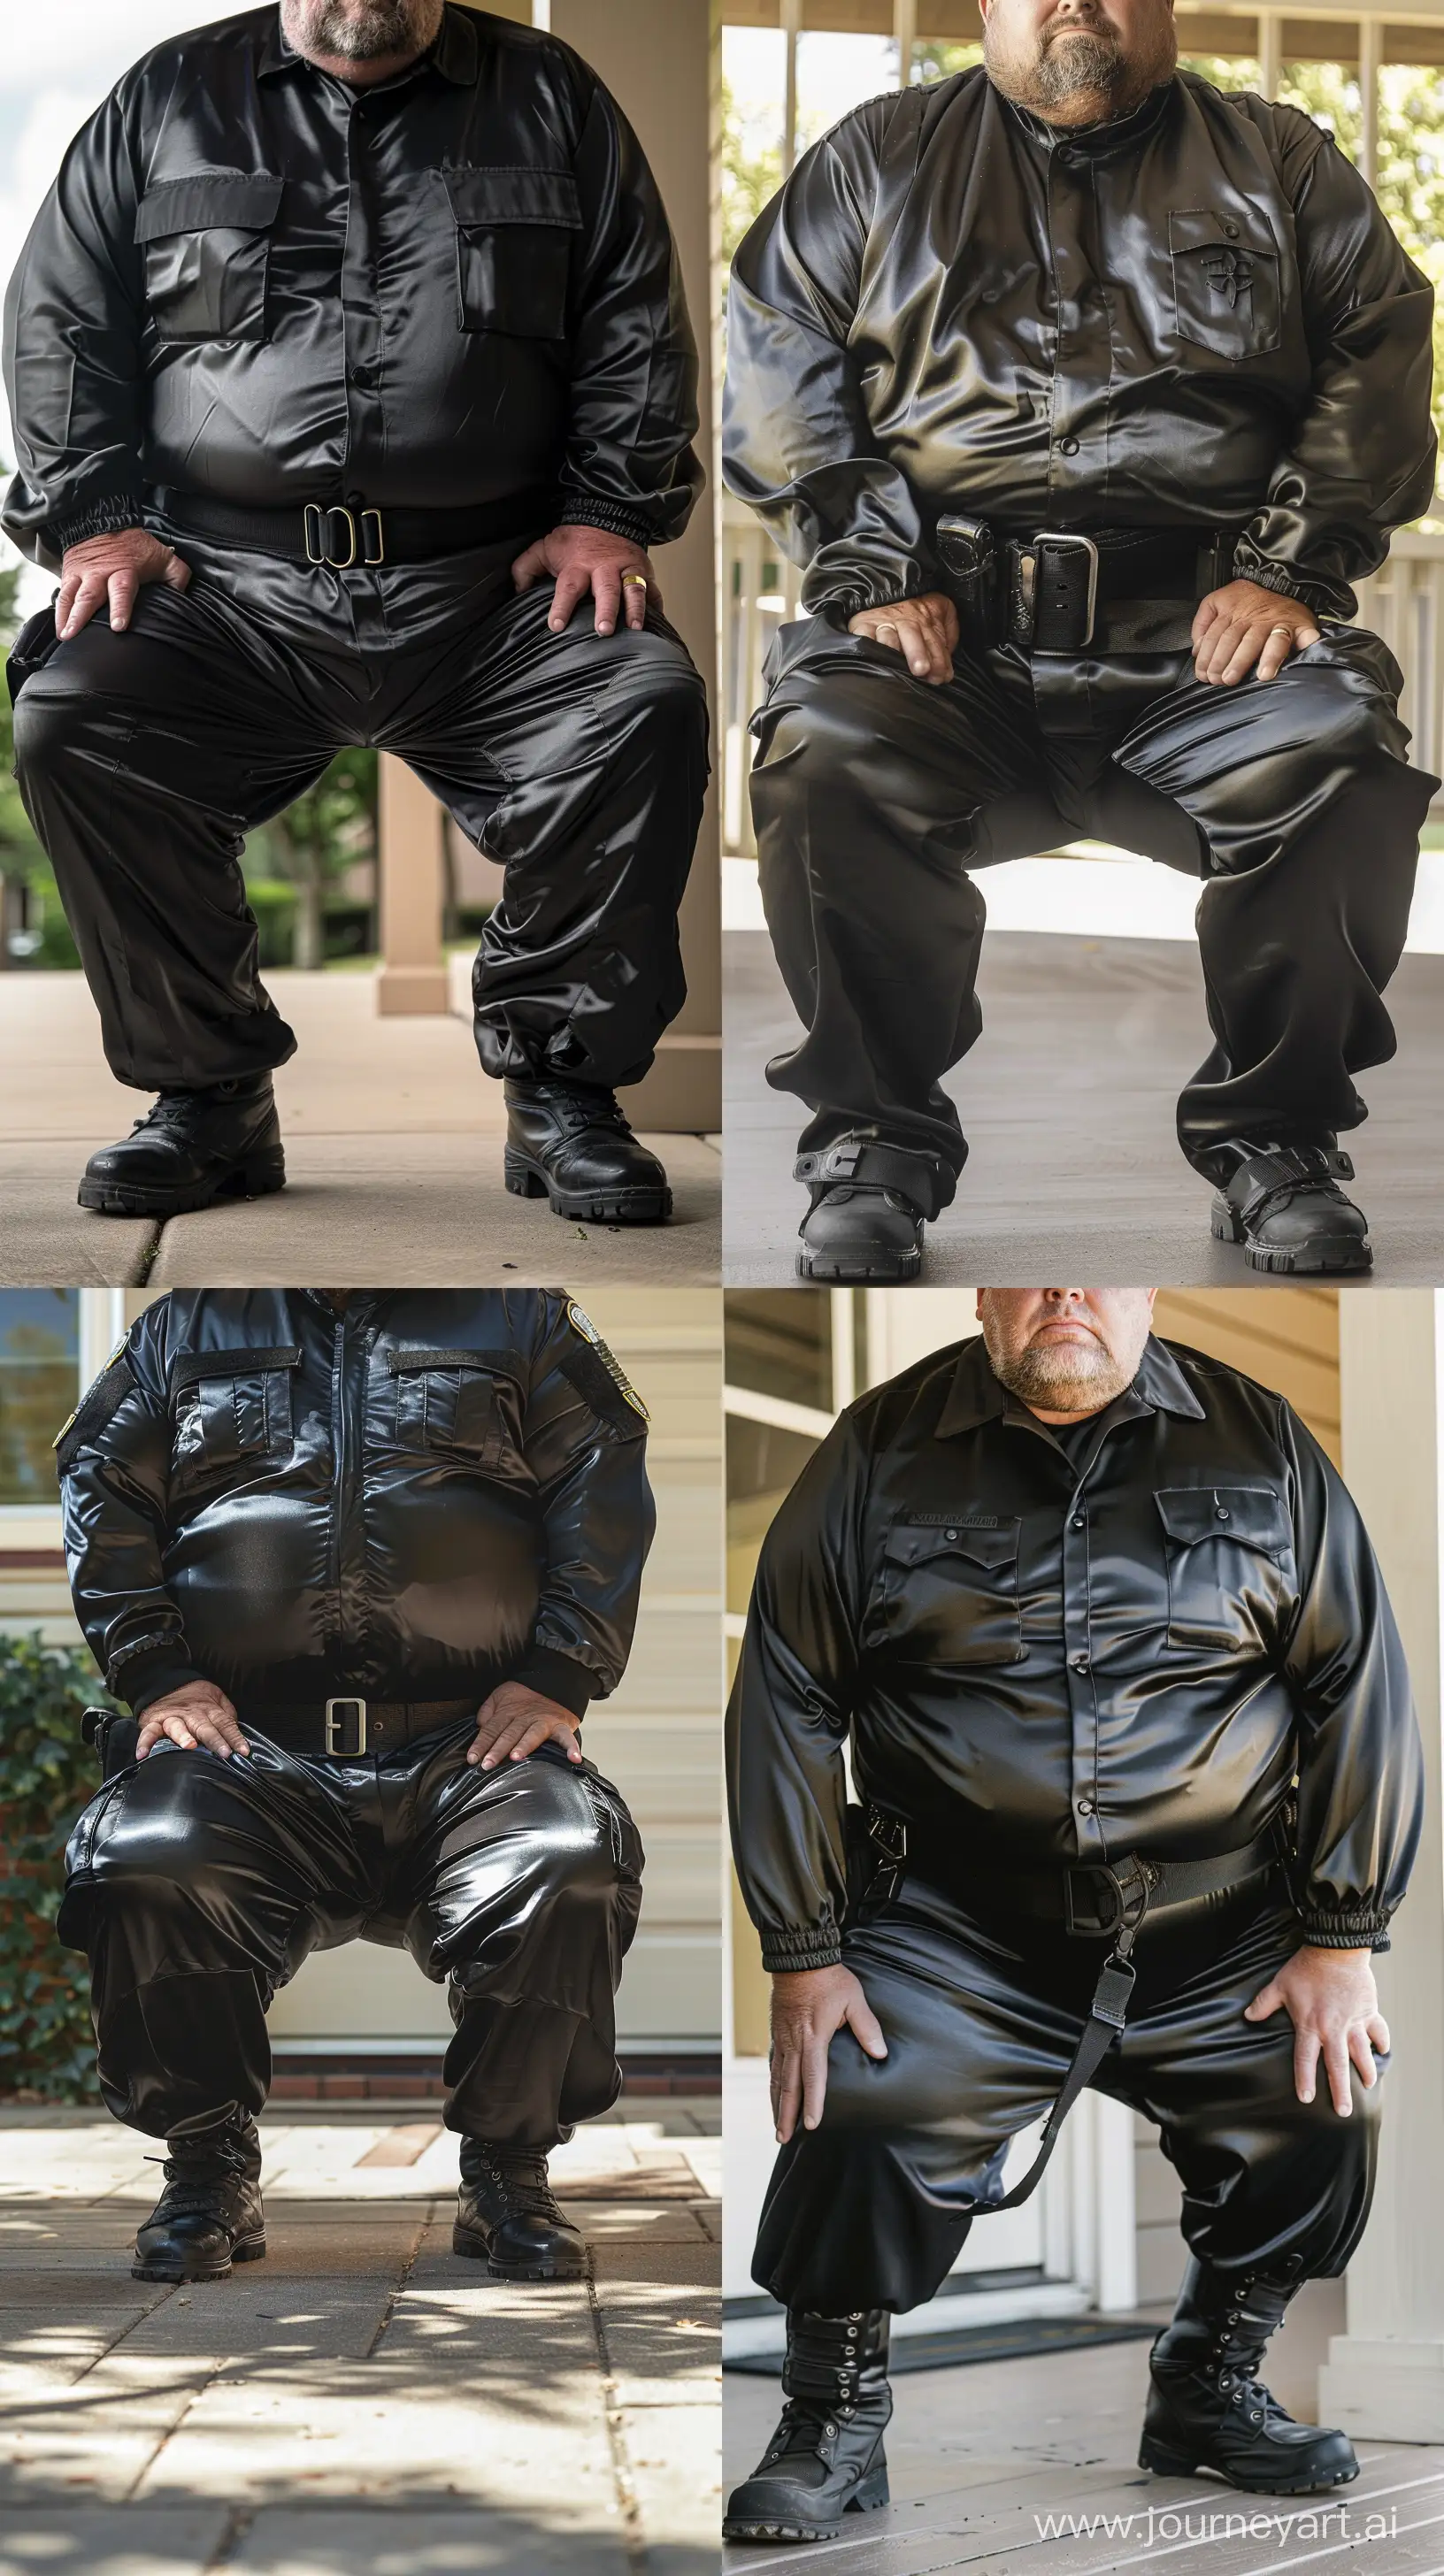 Elderly-Security-Guard-in-Black-Coverall-Kneeling-Outdoors-at-Noon